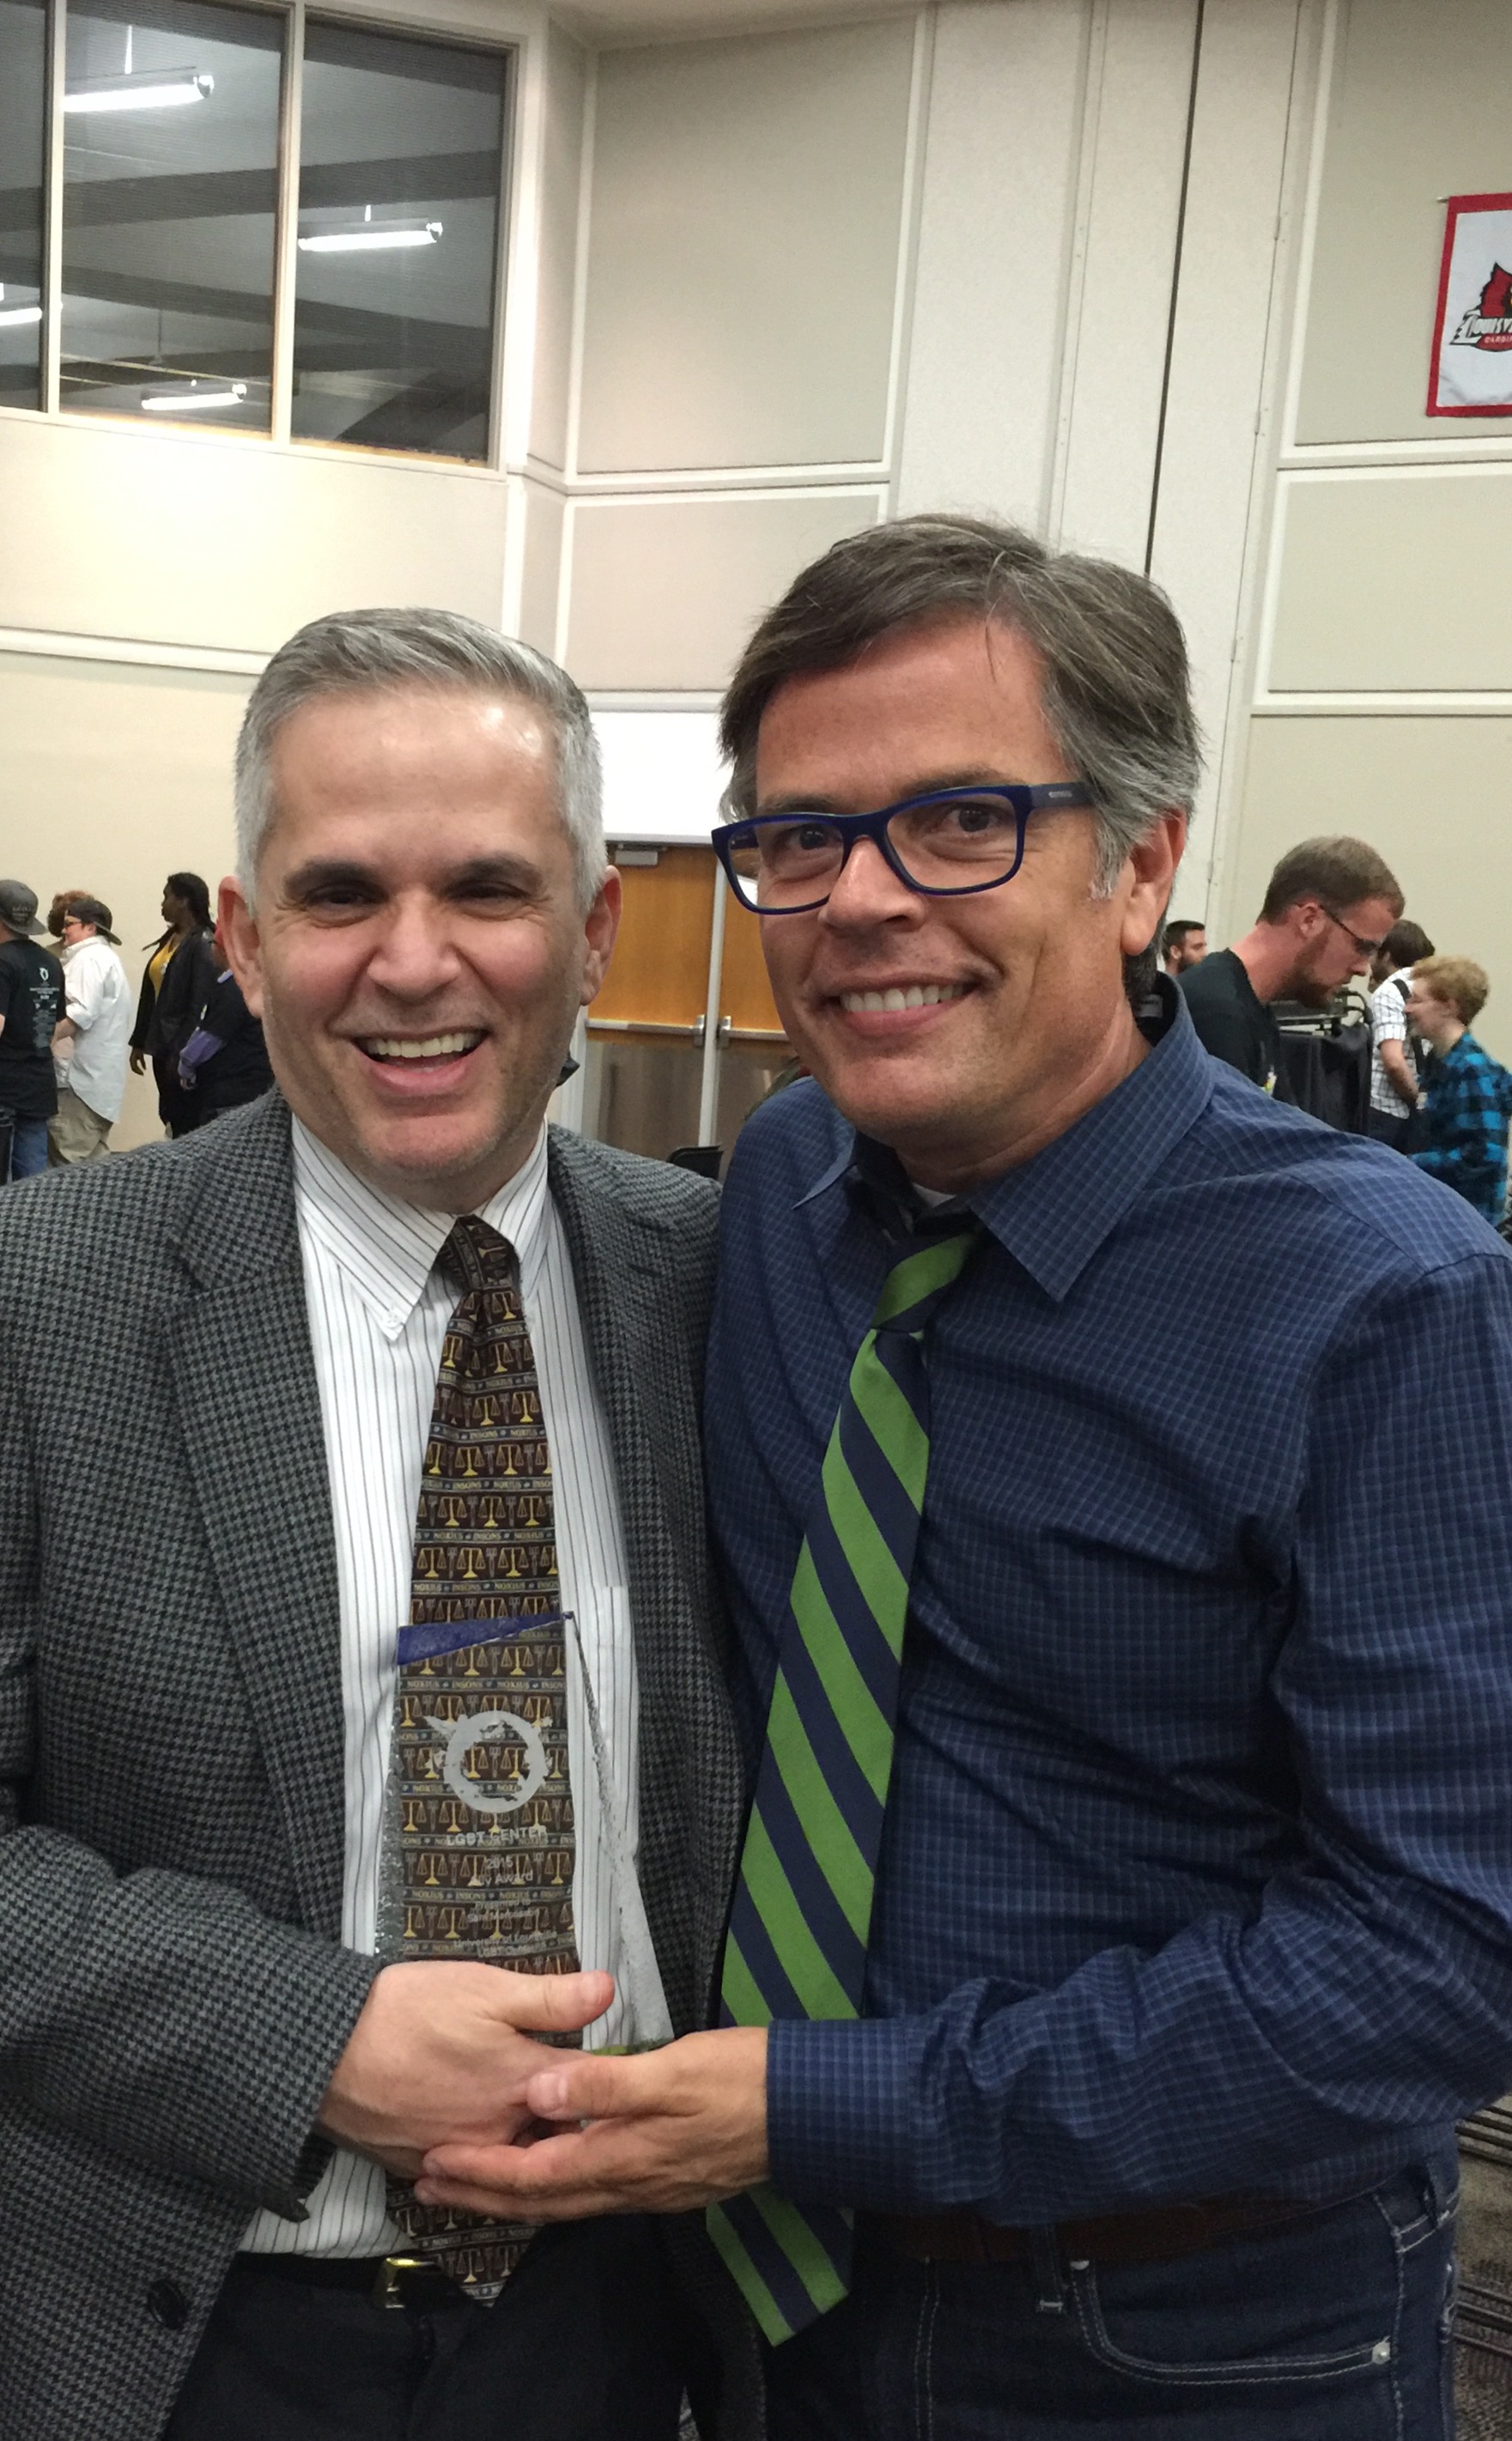 Professor Marcosson receives Ally Award from LGBT Center